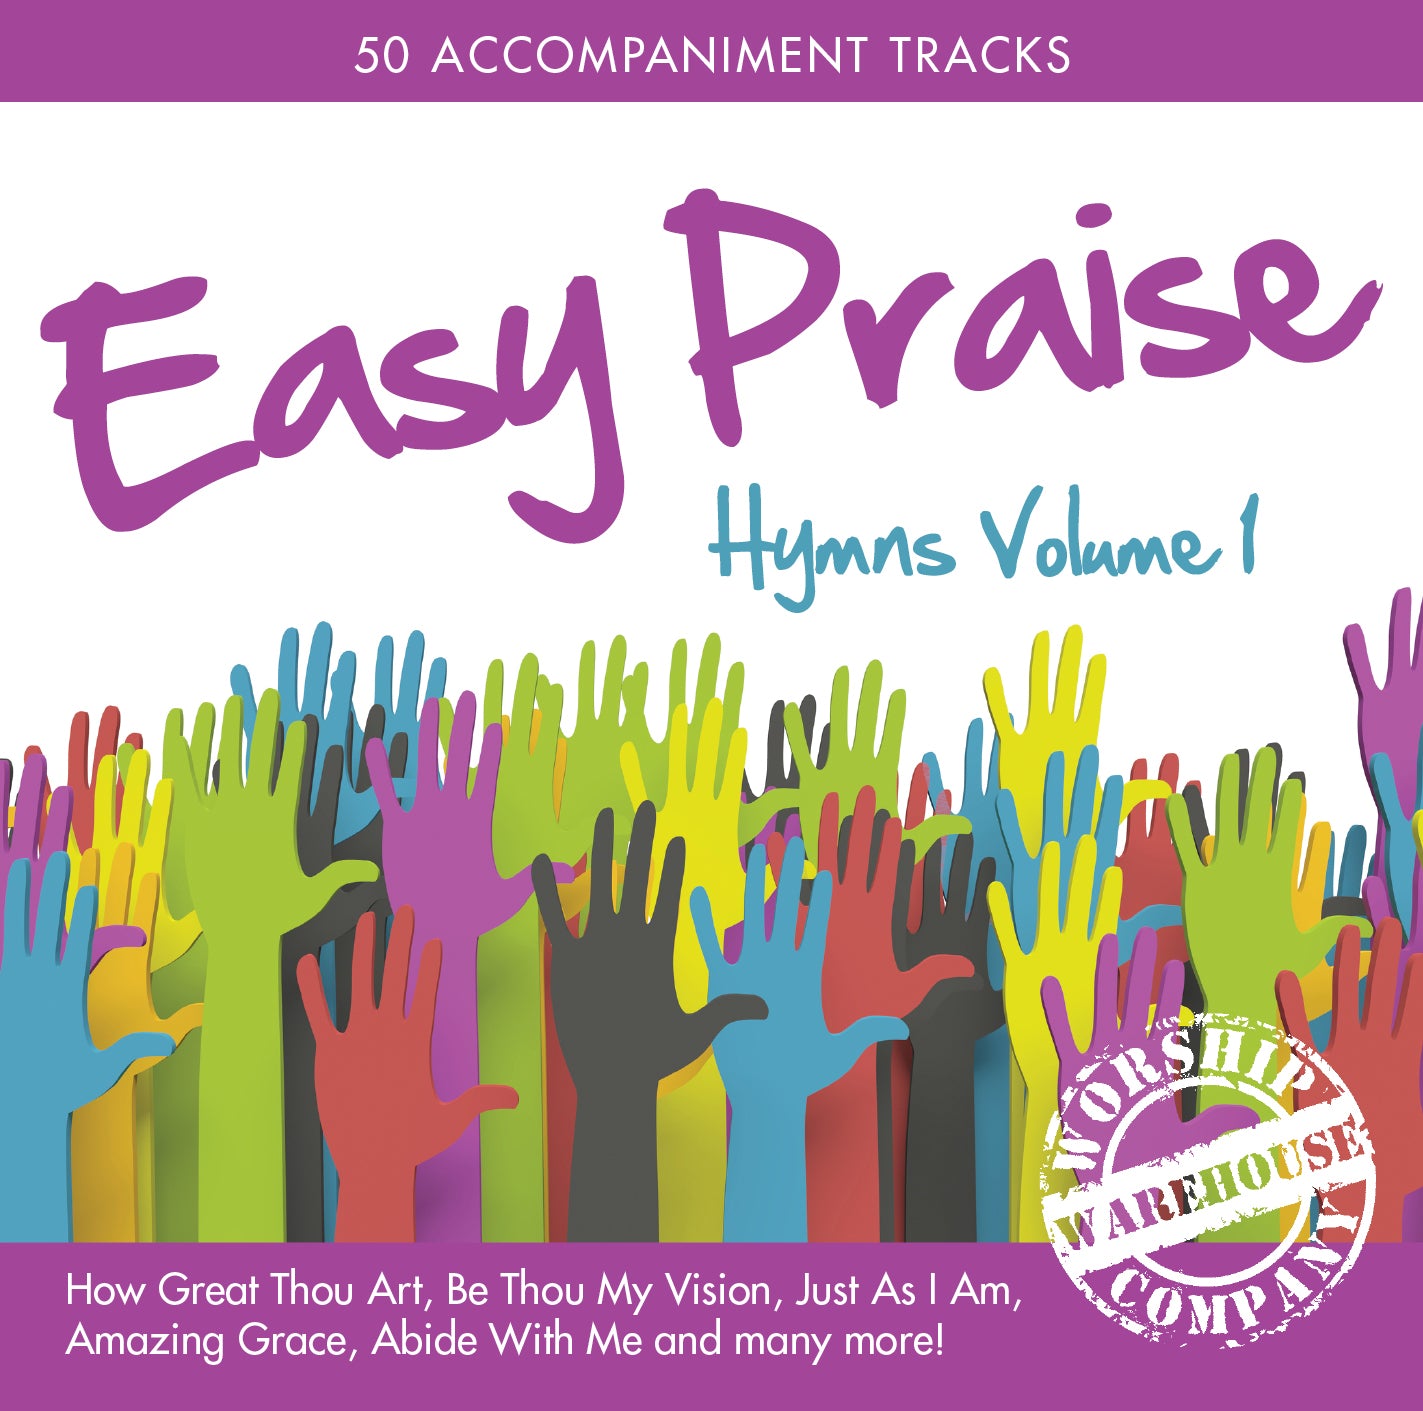 Image of Easy Praise Hymns Volume 1 Double CD other